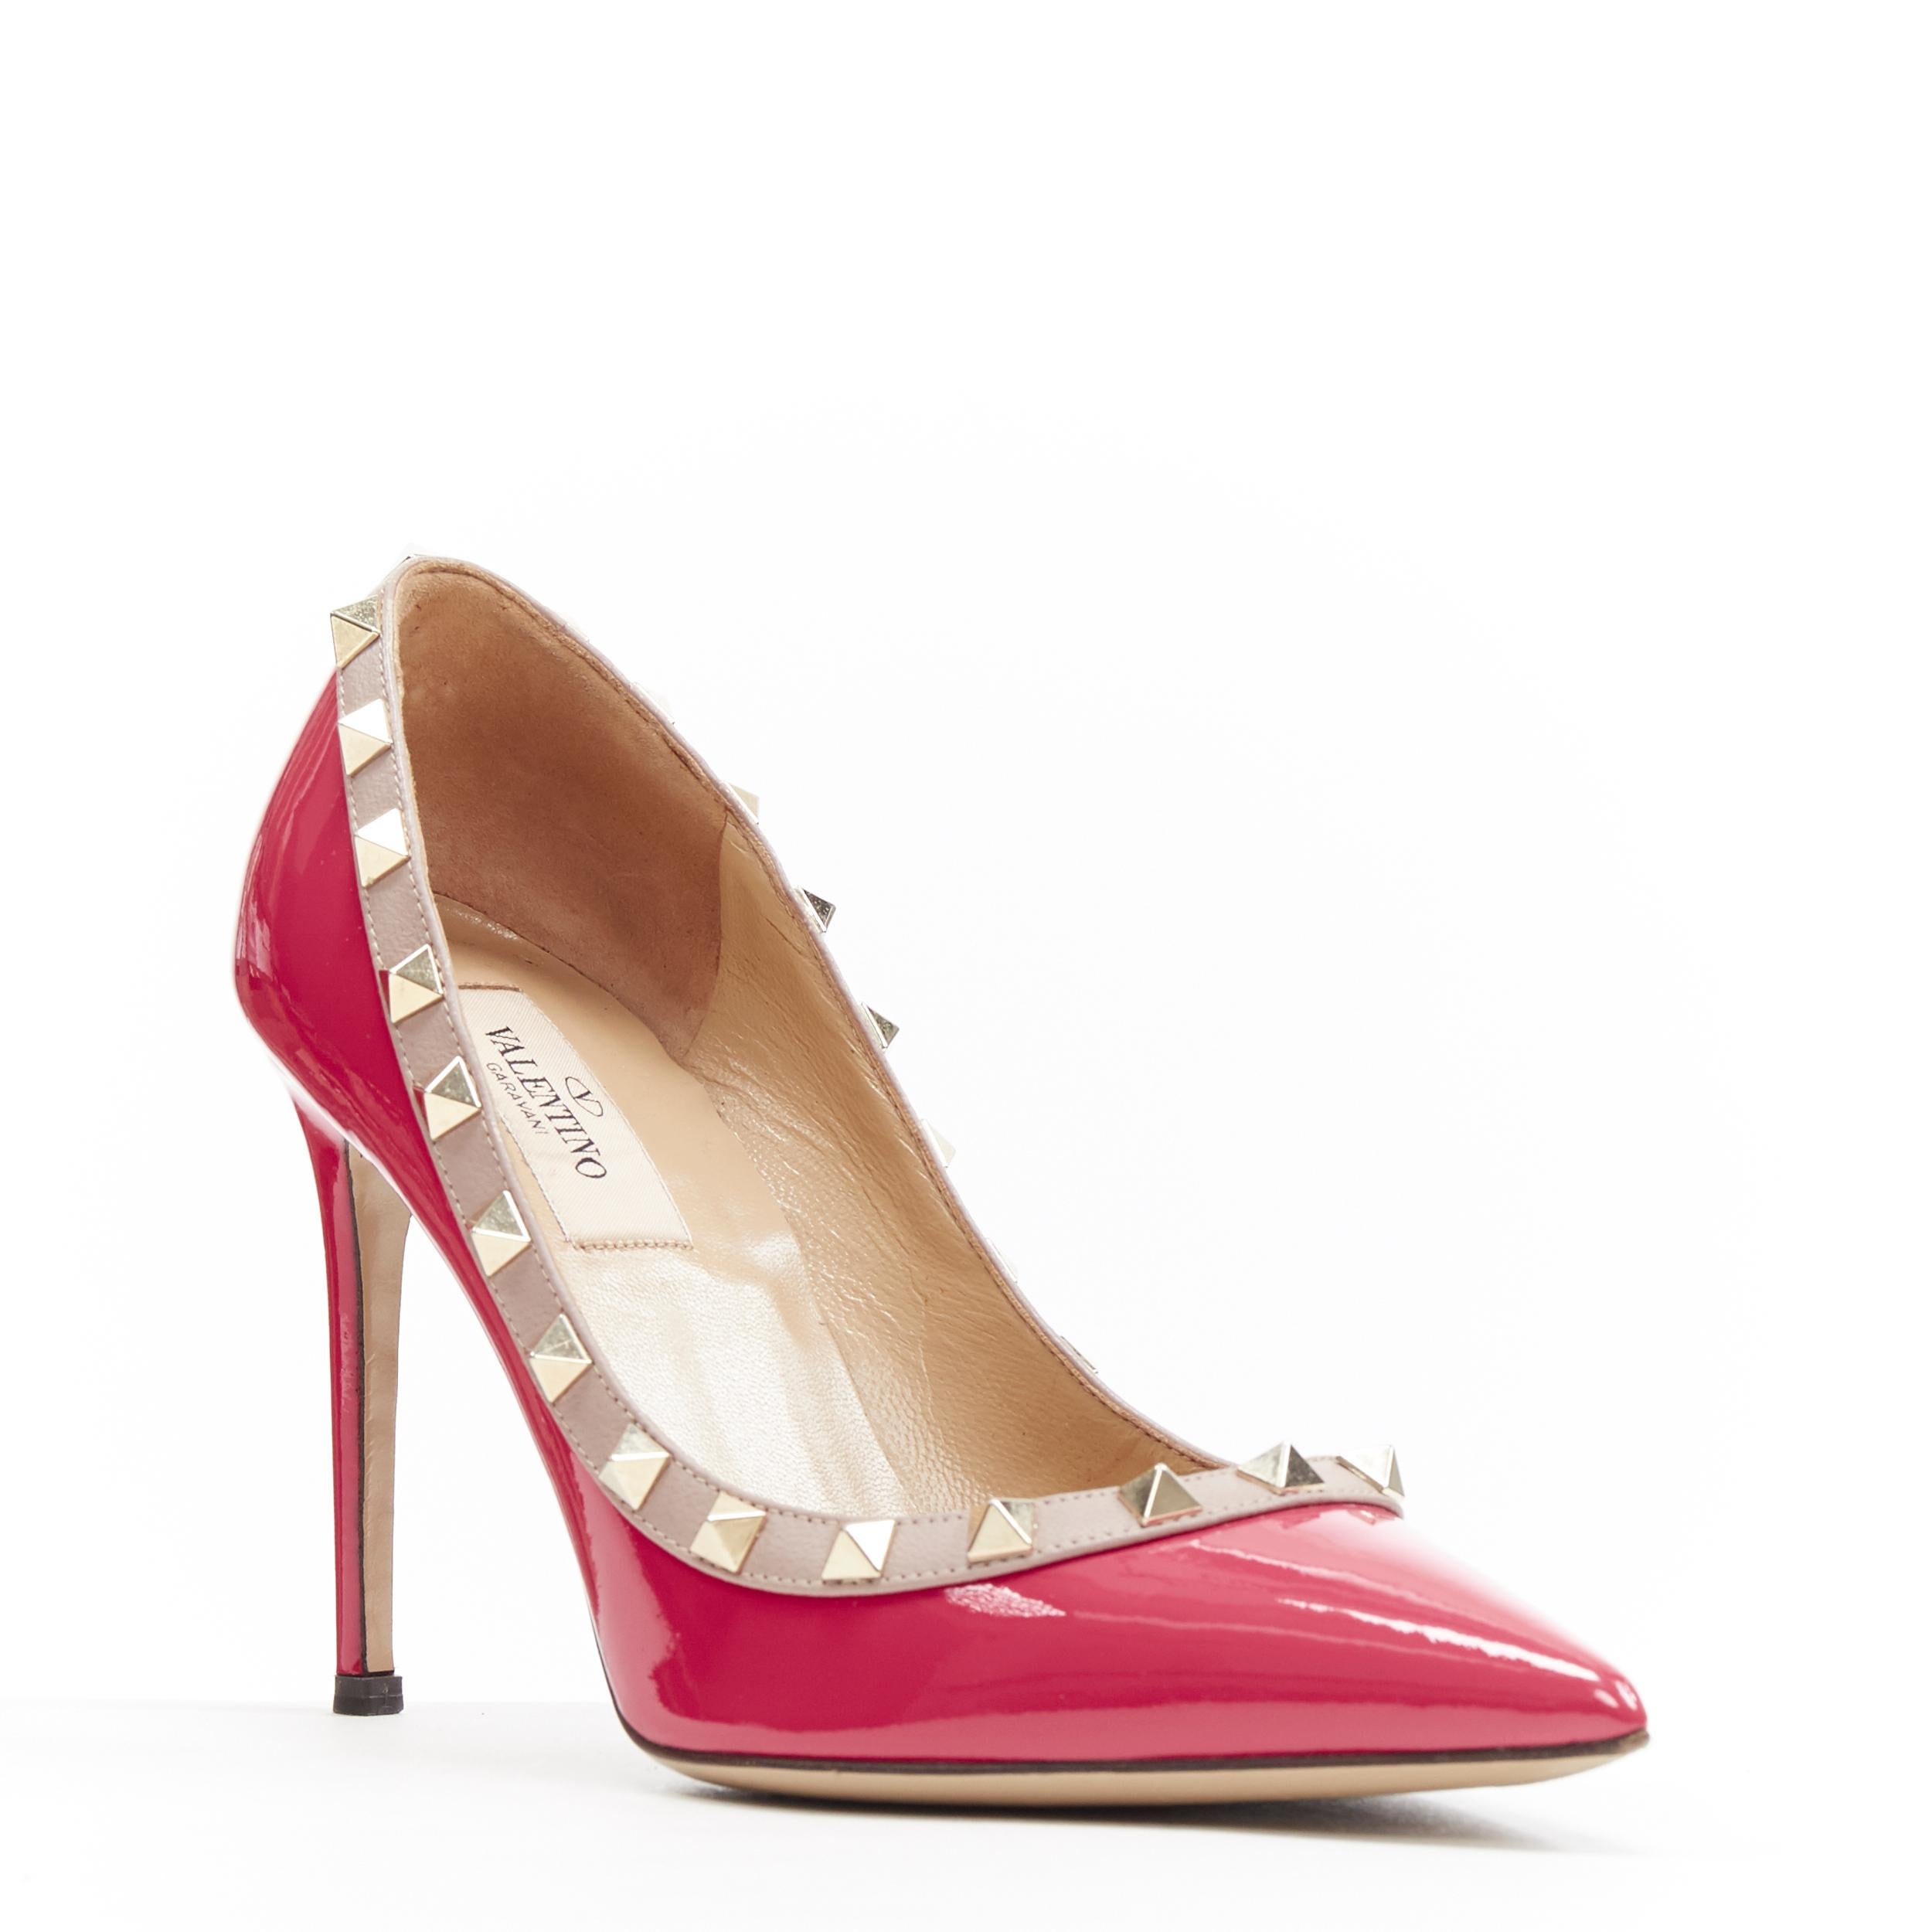 VALENTINO Rockstud pink patent pyramid stud trimmed pointy pigalle pump EU35.5
Brand: Valentino
Model Name / Style: Rockstud pump
Material: Patent leather
Color: Pink
Pattern: Solid
Extra Detail: High (3-3.9 in) heel height. Pointed Toe. Slim